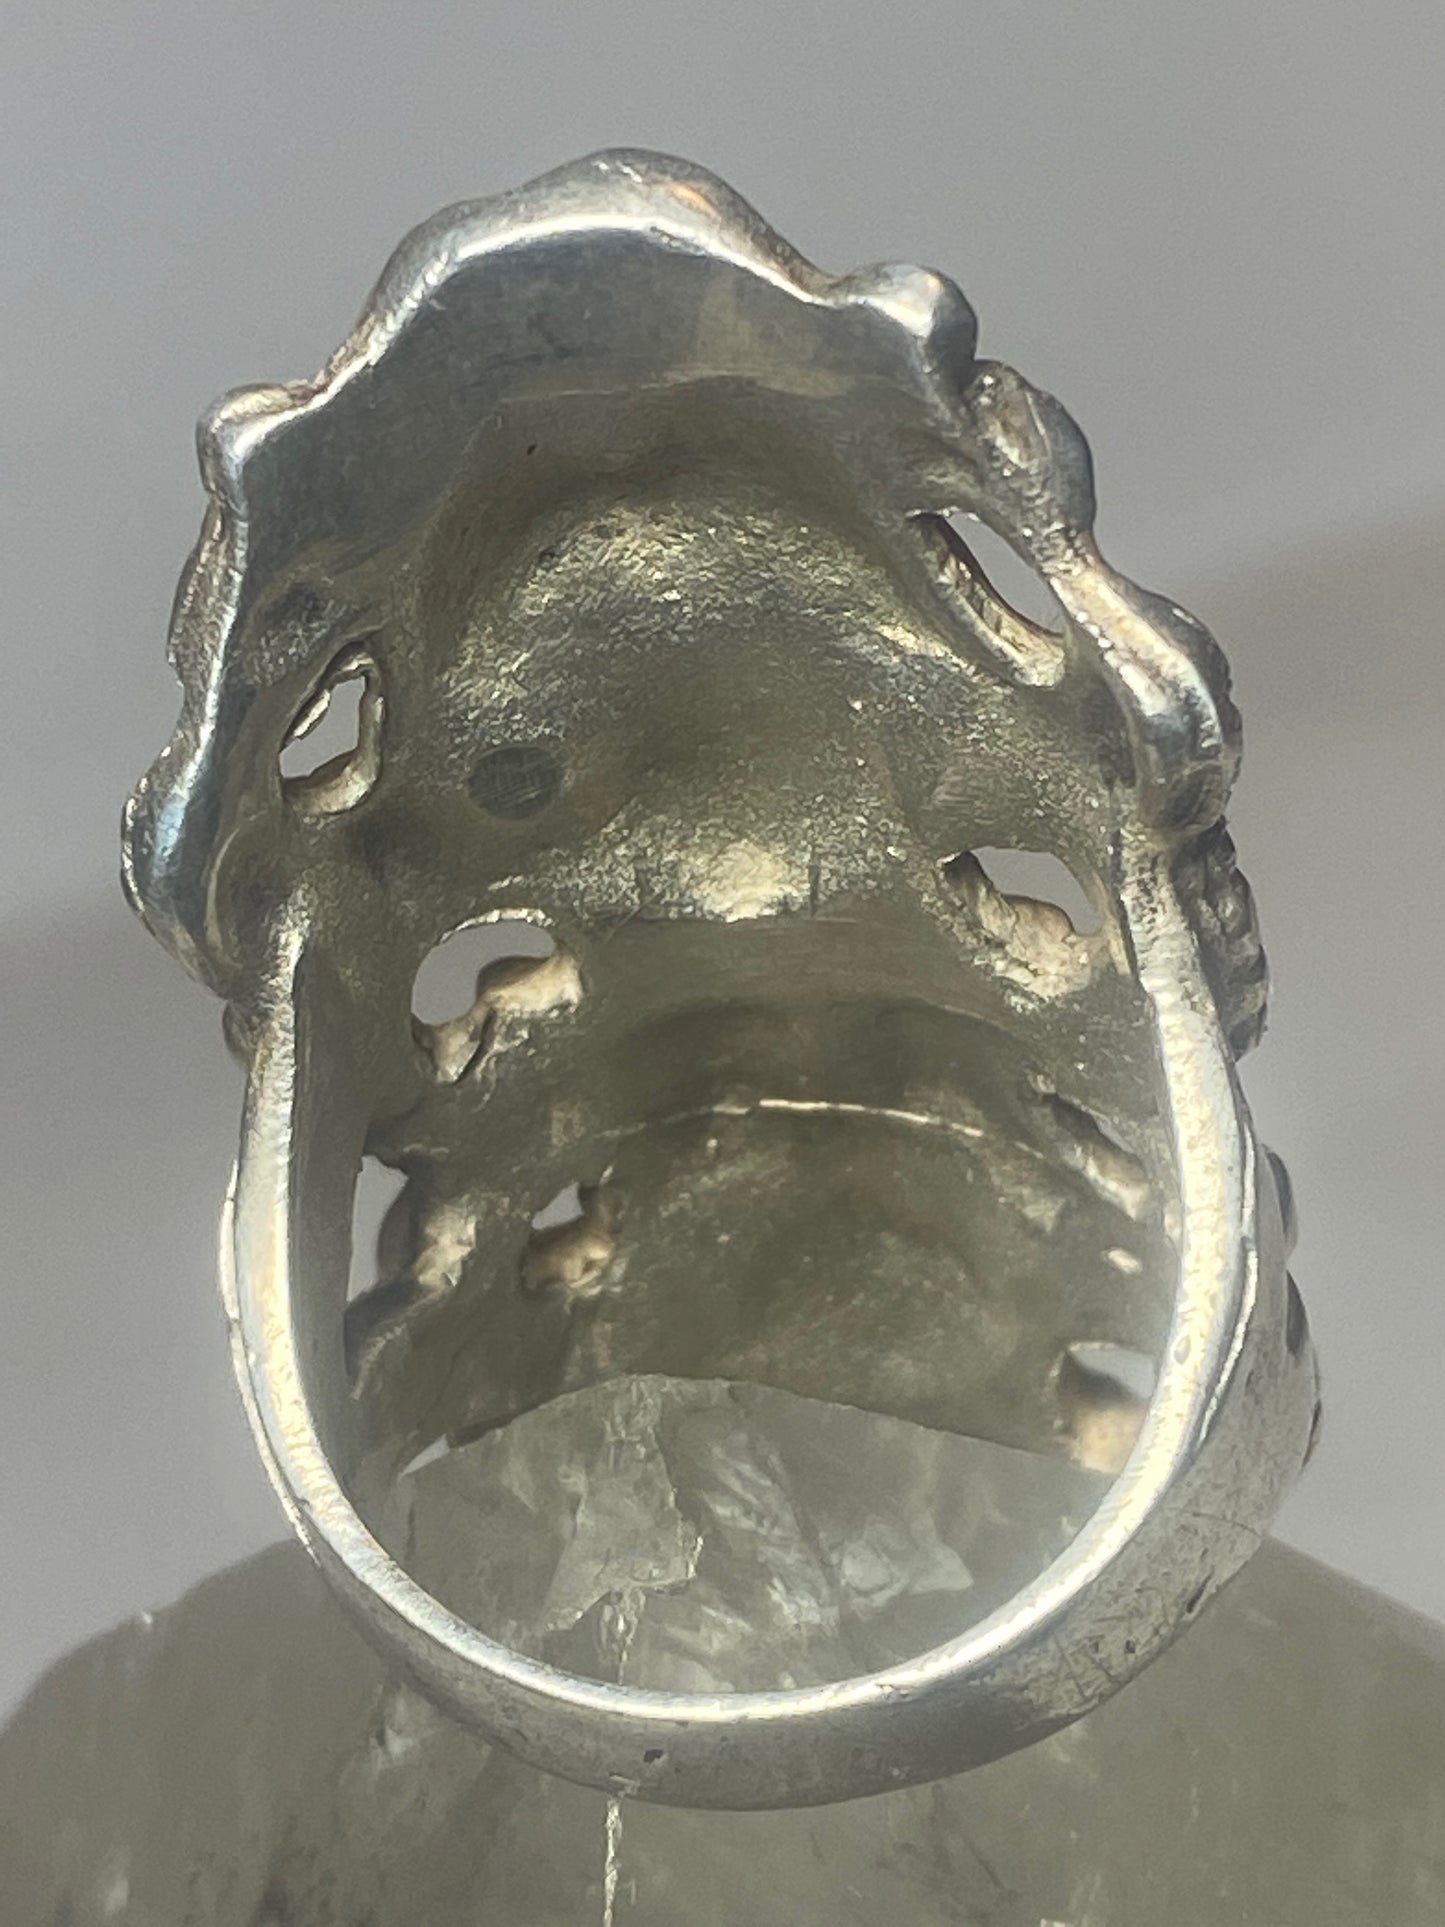 Faces ring long Art deco sterling silver women